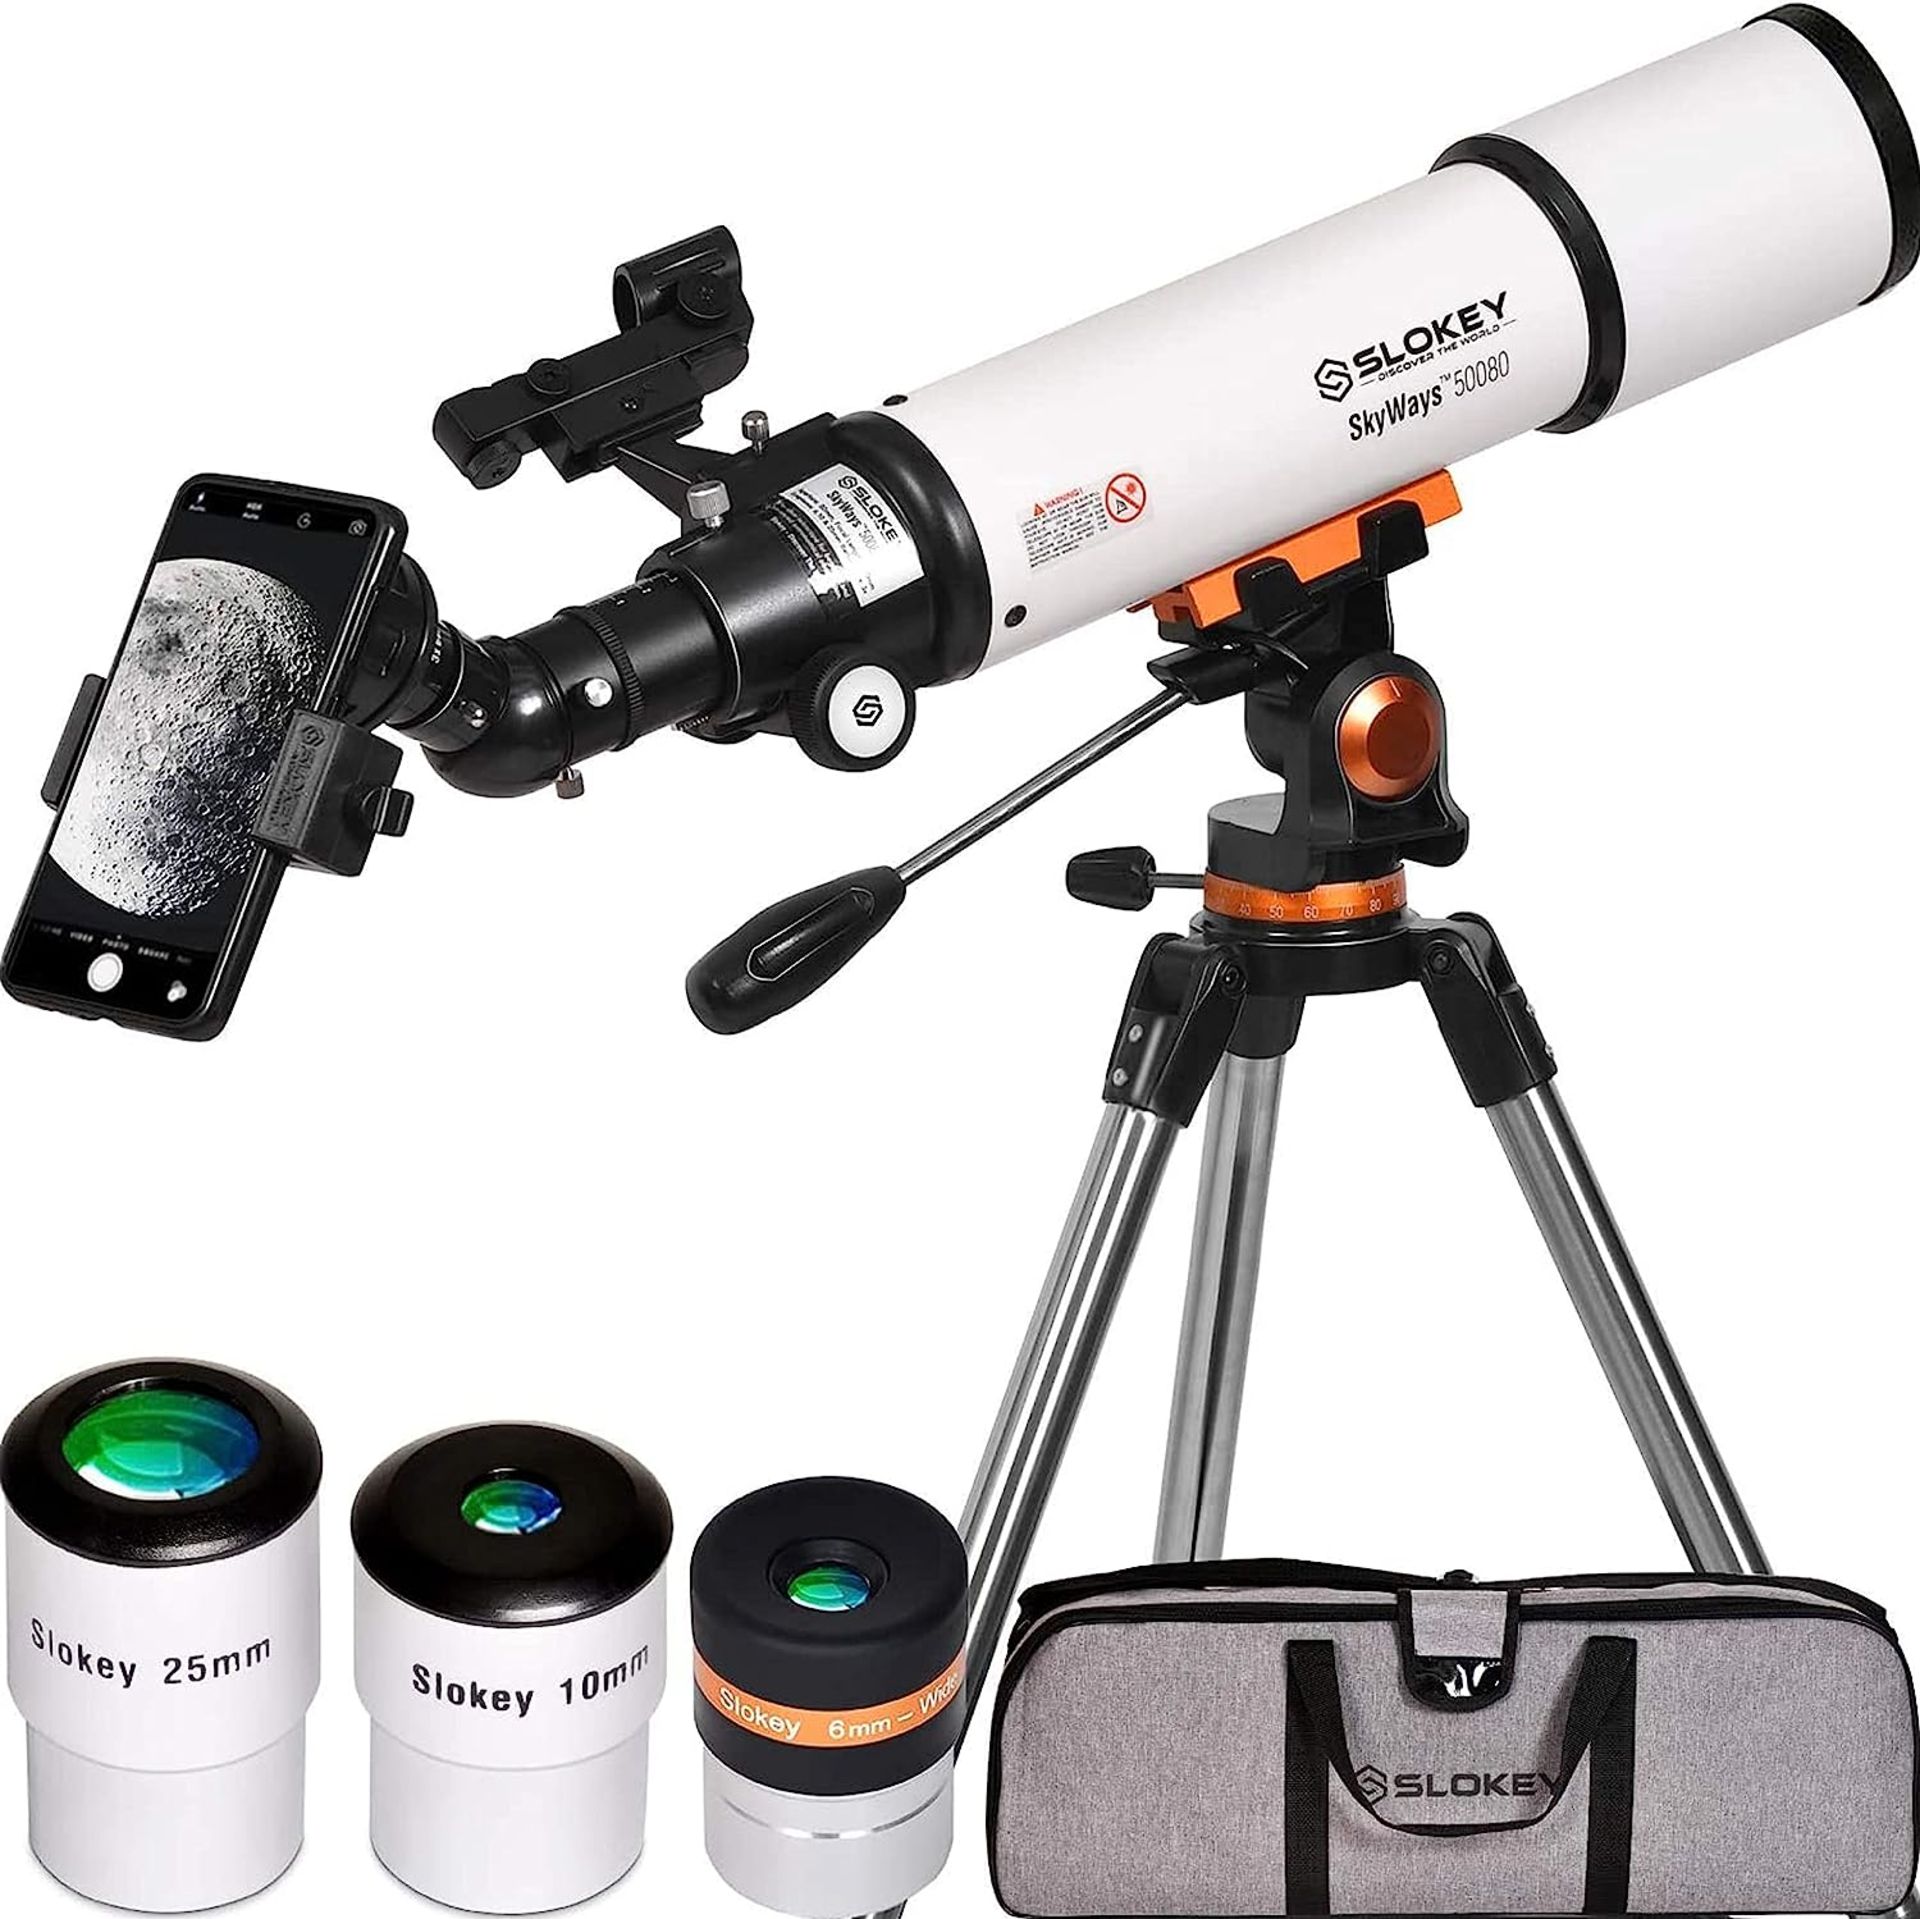 3 x Slokey 50080 Skyways Telescope for Astronomy with Accessories (NEW) - AMAZON RRP £832.47 ! - Image 2 of 7